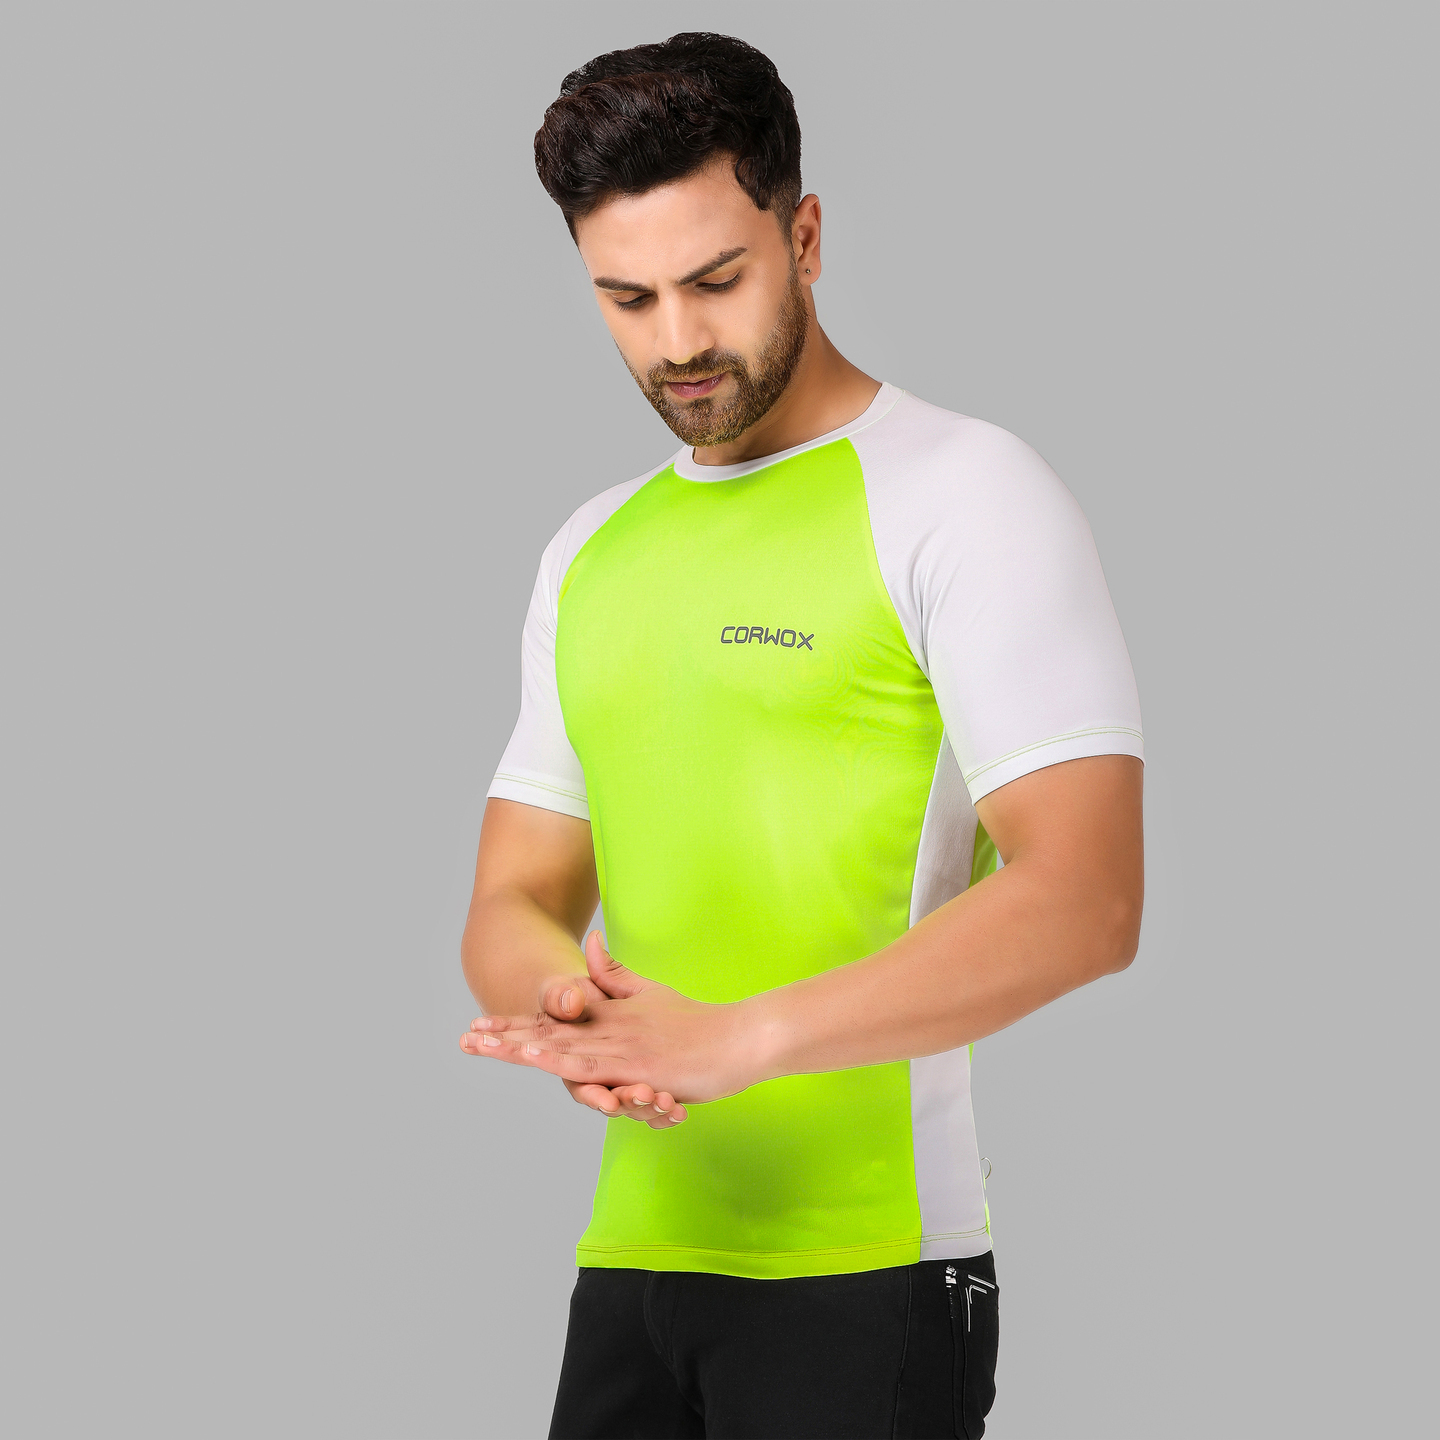 CORWOX Men's Active Neon Green & White Sports Polyester T-Shirt